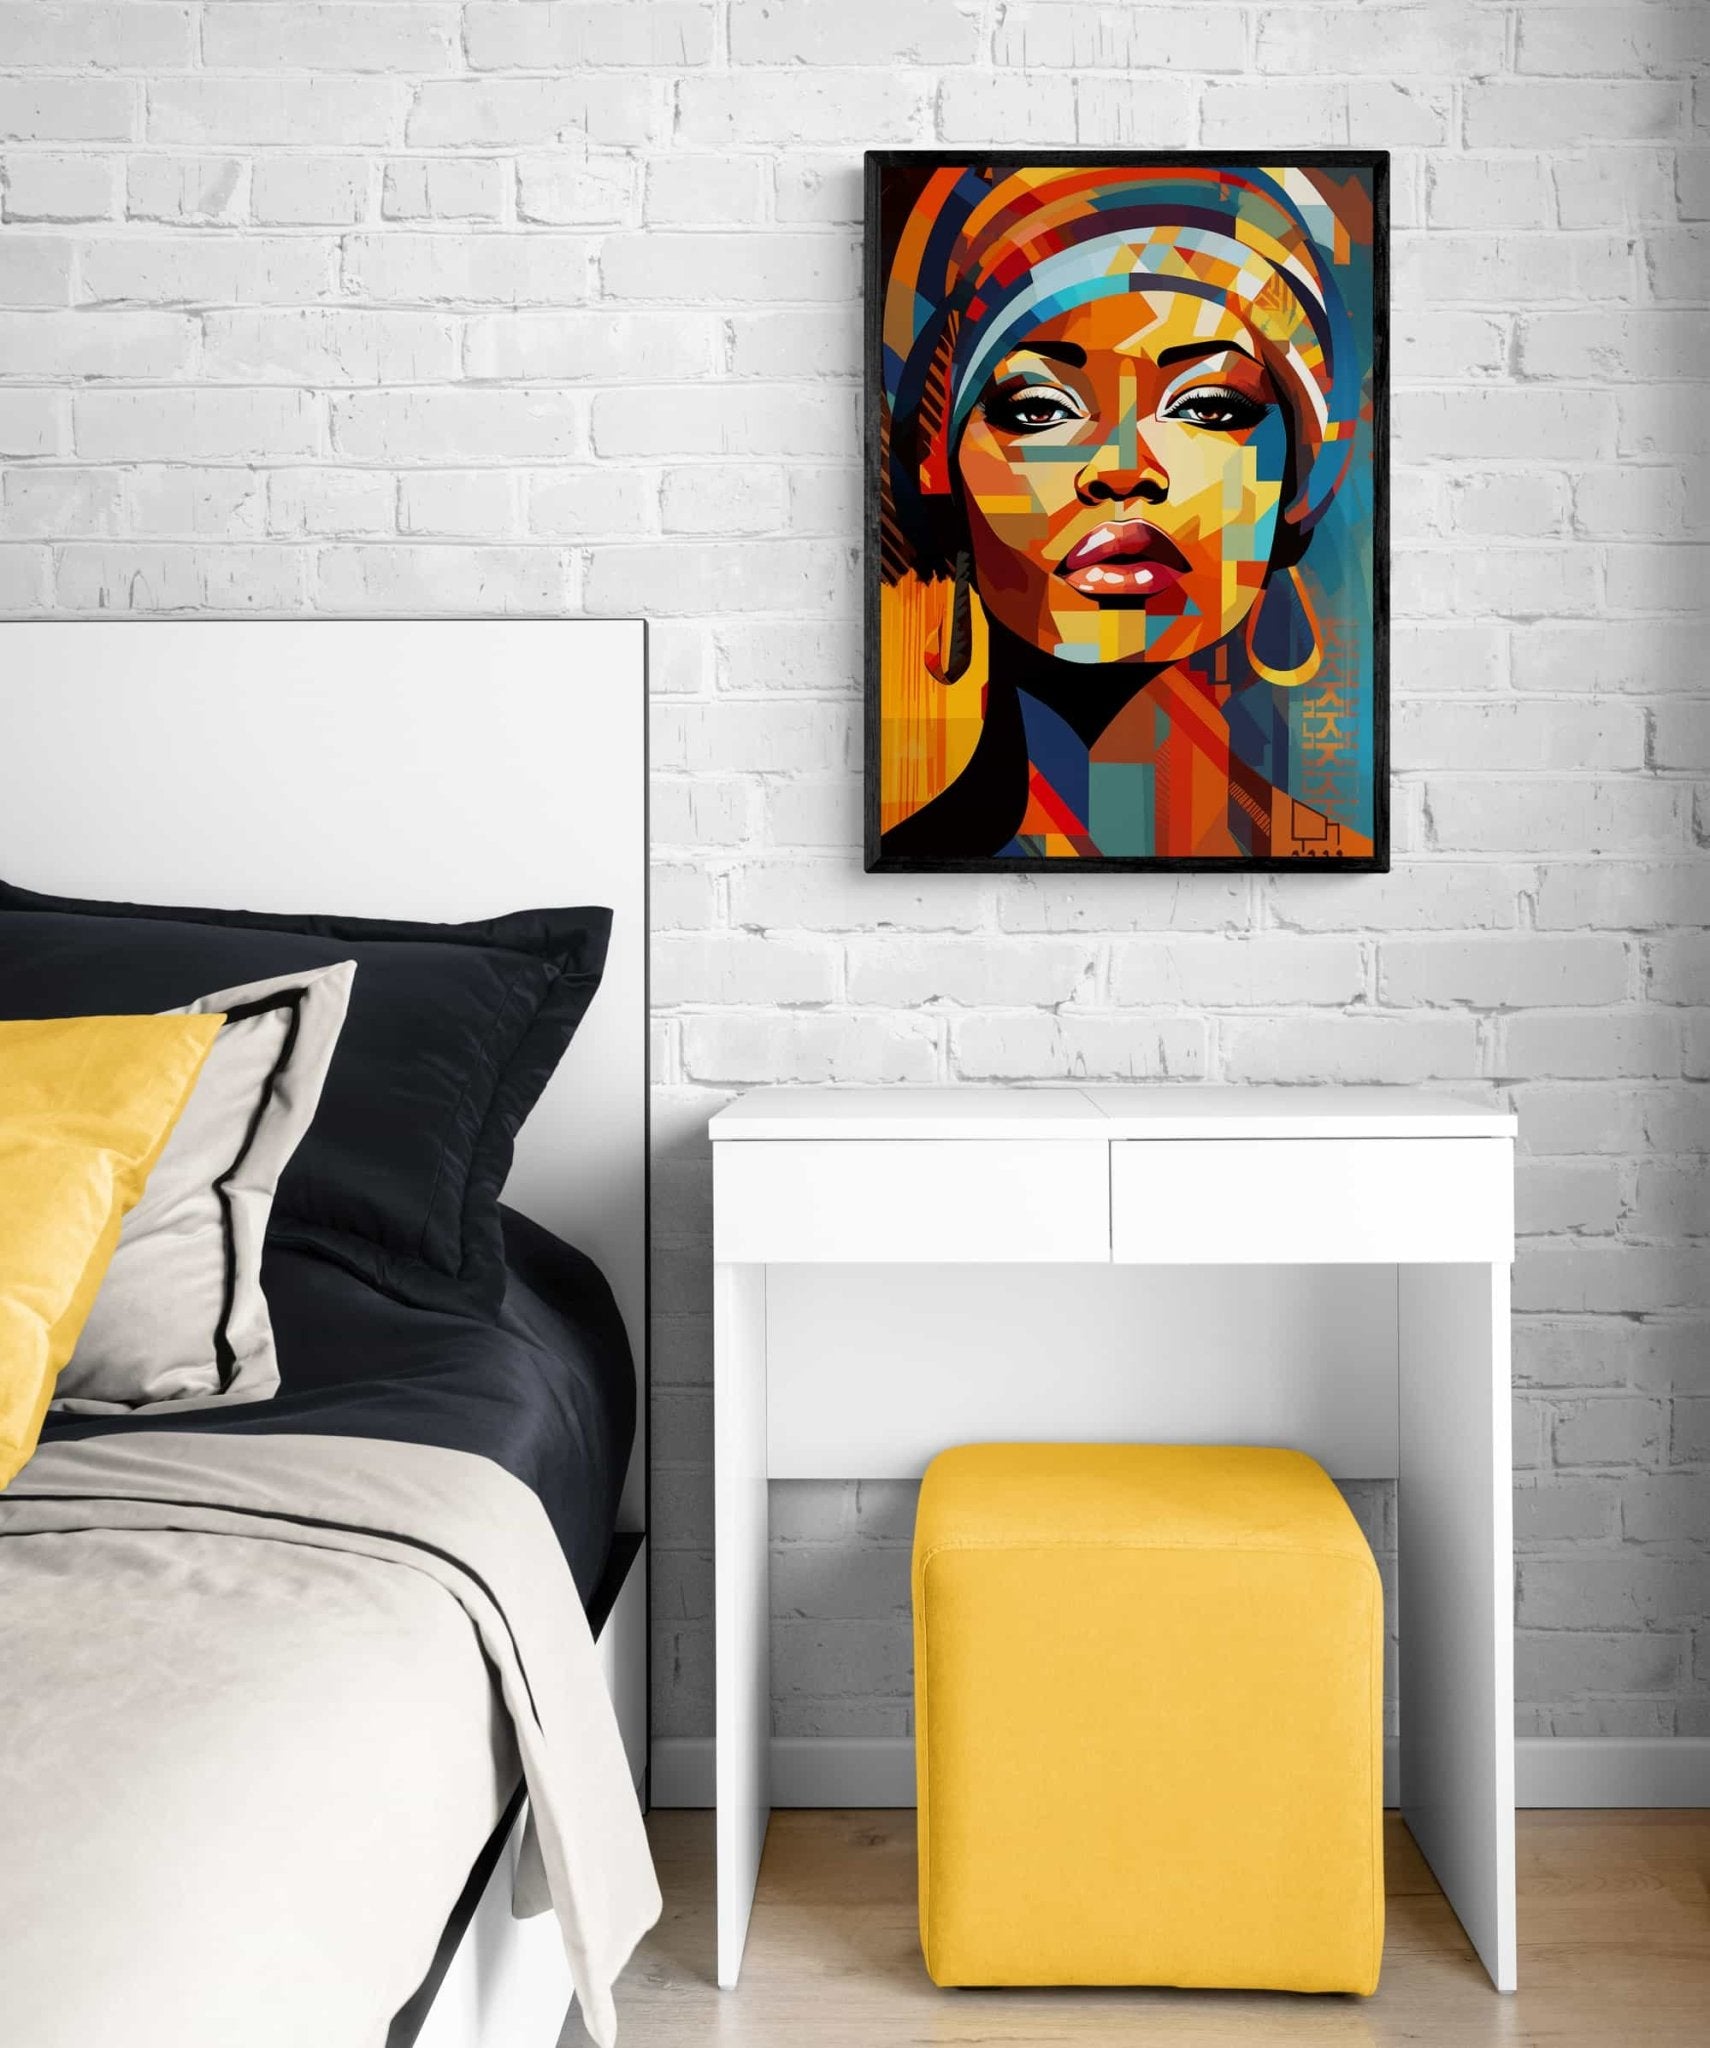 Colorful African American Women Portrait | Geometric Abstract Poster - Milton Wes Art Framed Wall Art